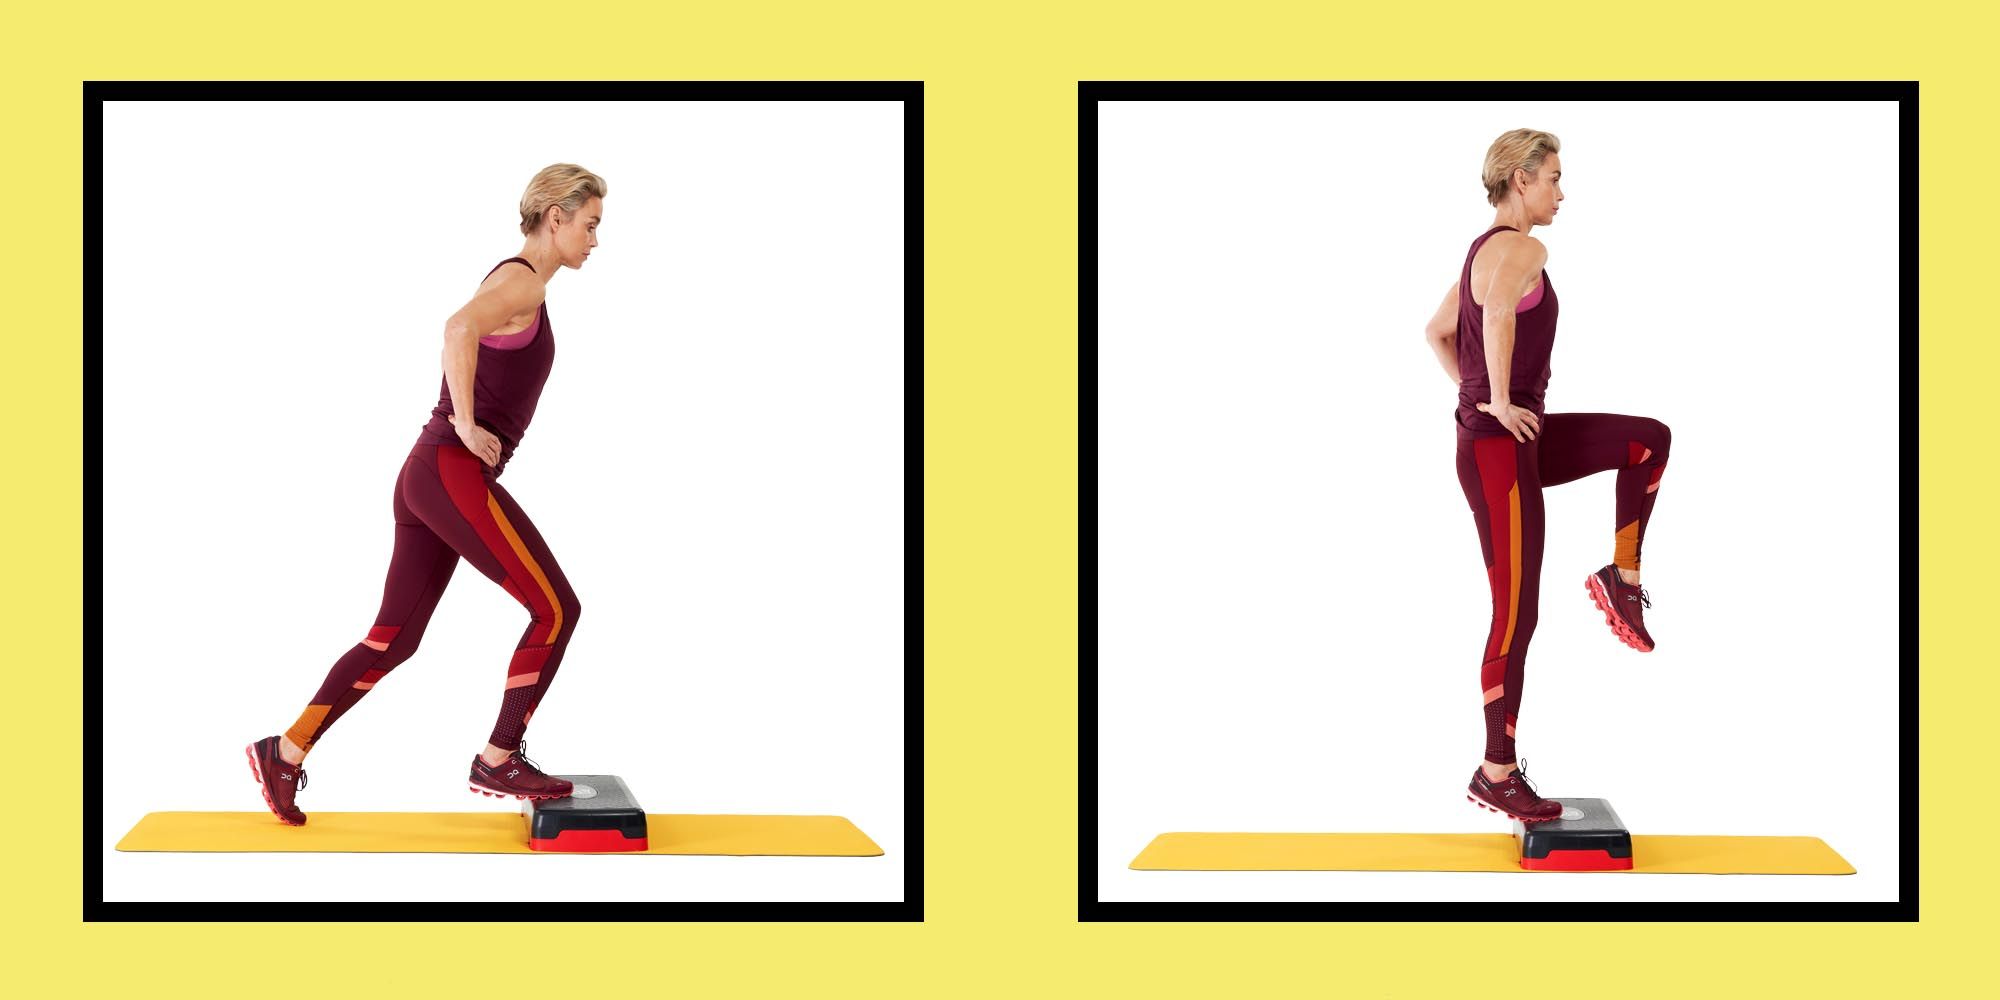 Step Down - forward by Valerie M. - Exercise How-to - Skimble